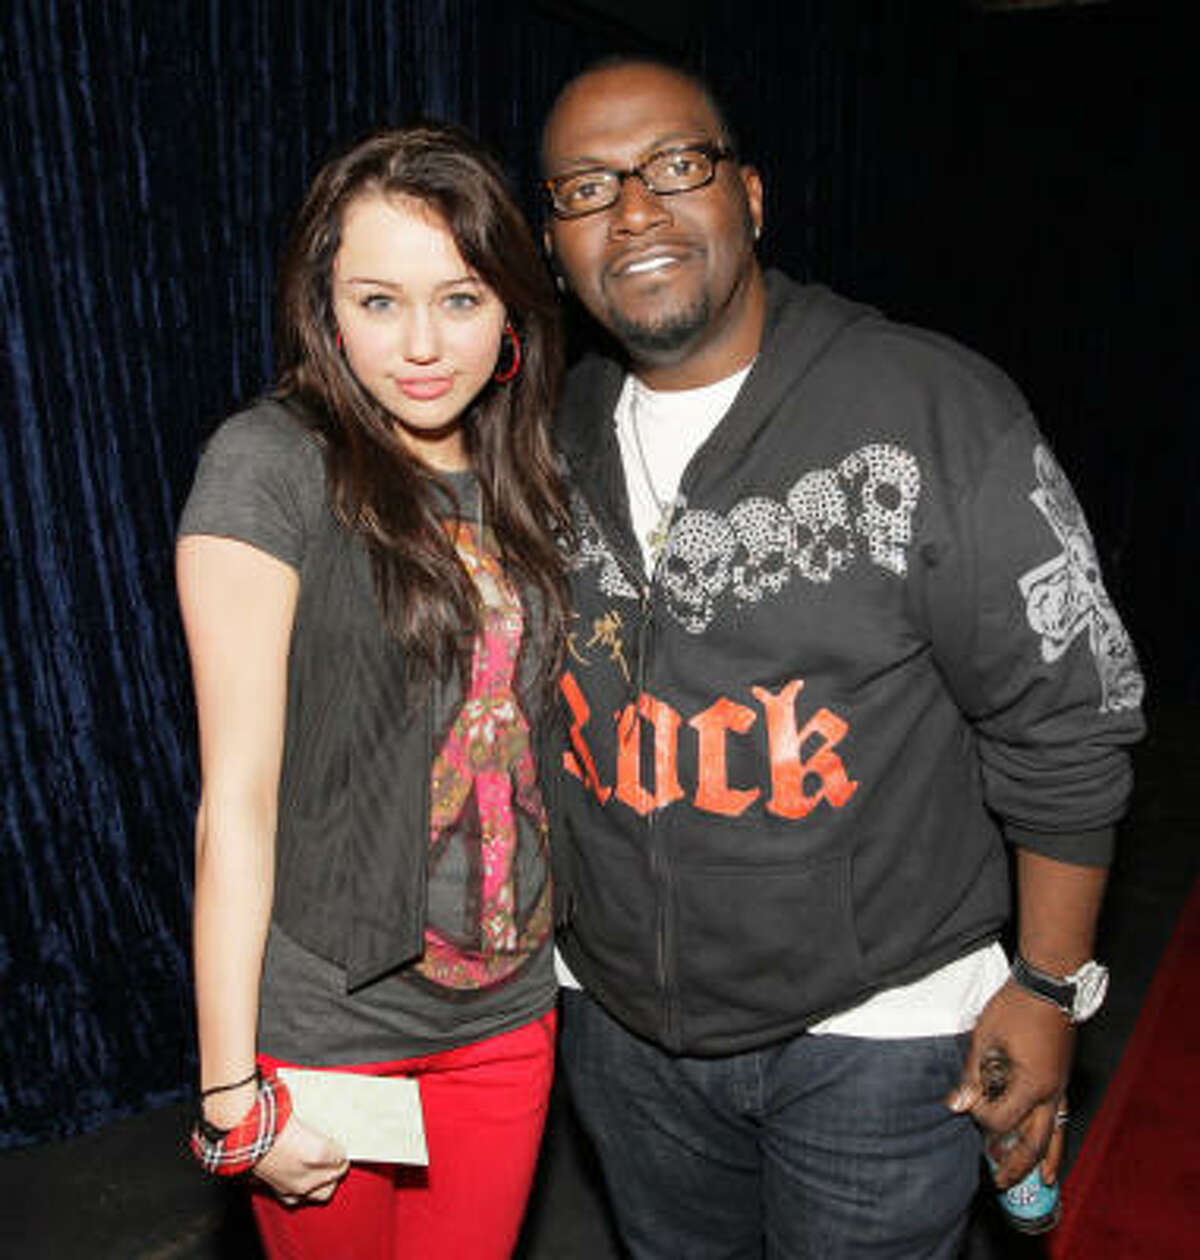 Where has Miley/Hannah been lately? Here's Miley with Randy Jackson during a February taping of "Randy Jackson Presents America's Best Dance Crew."